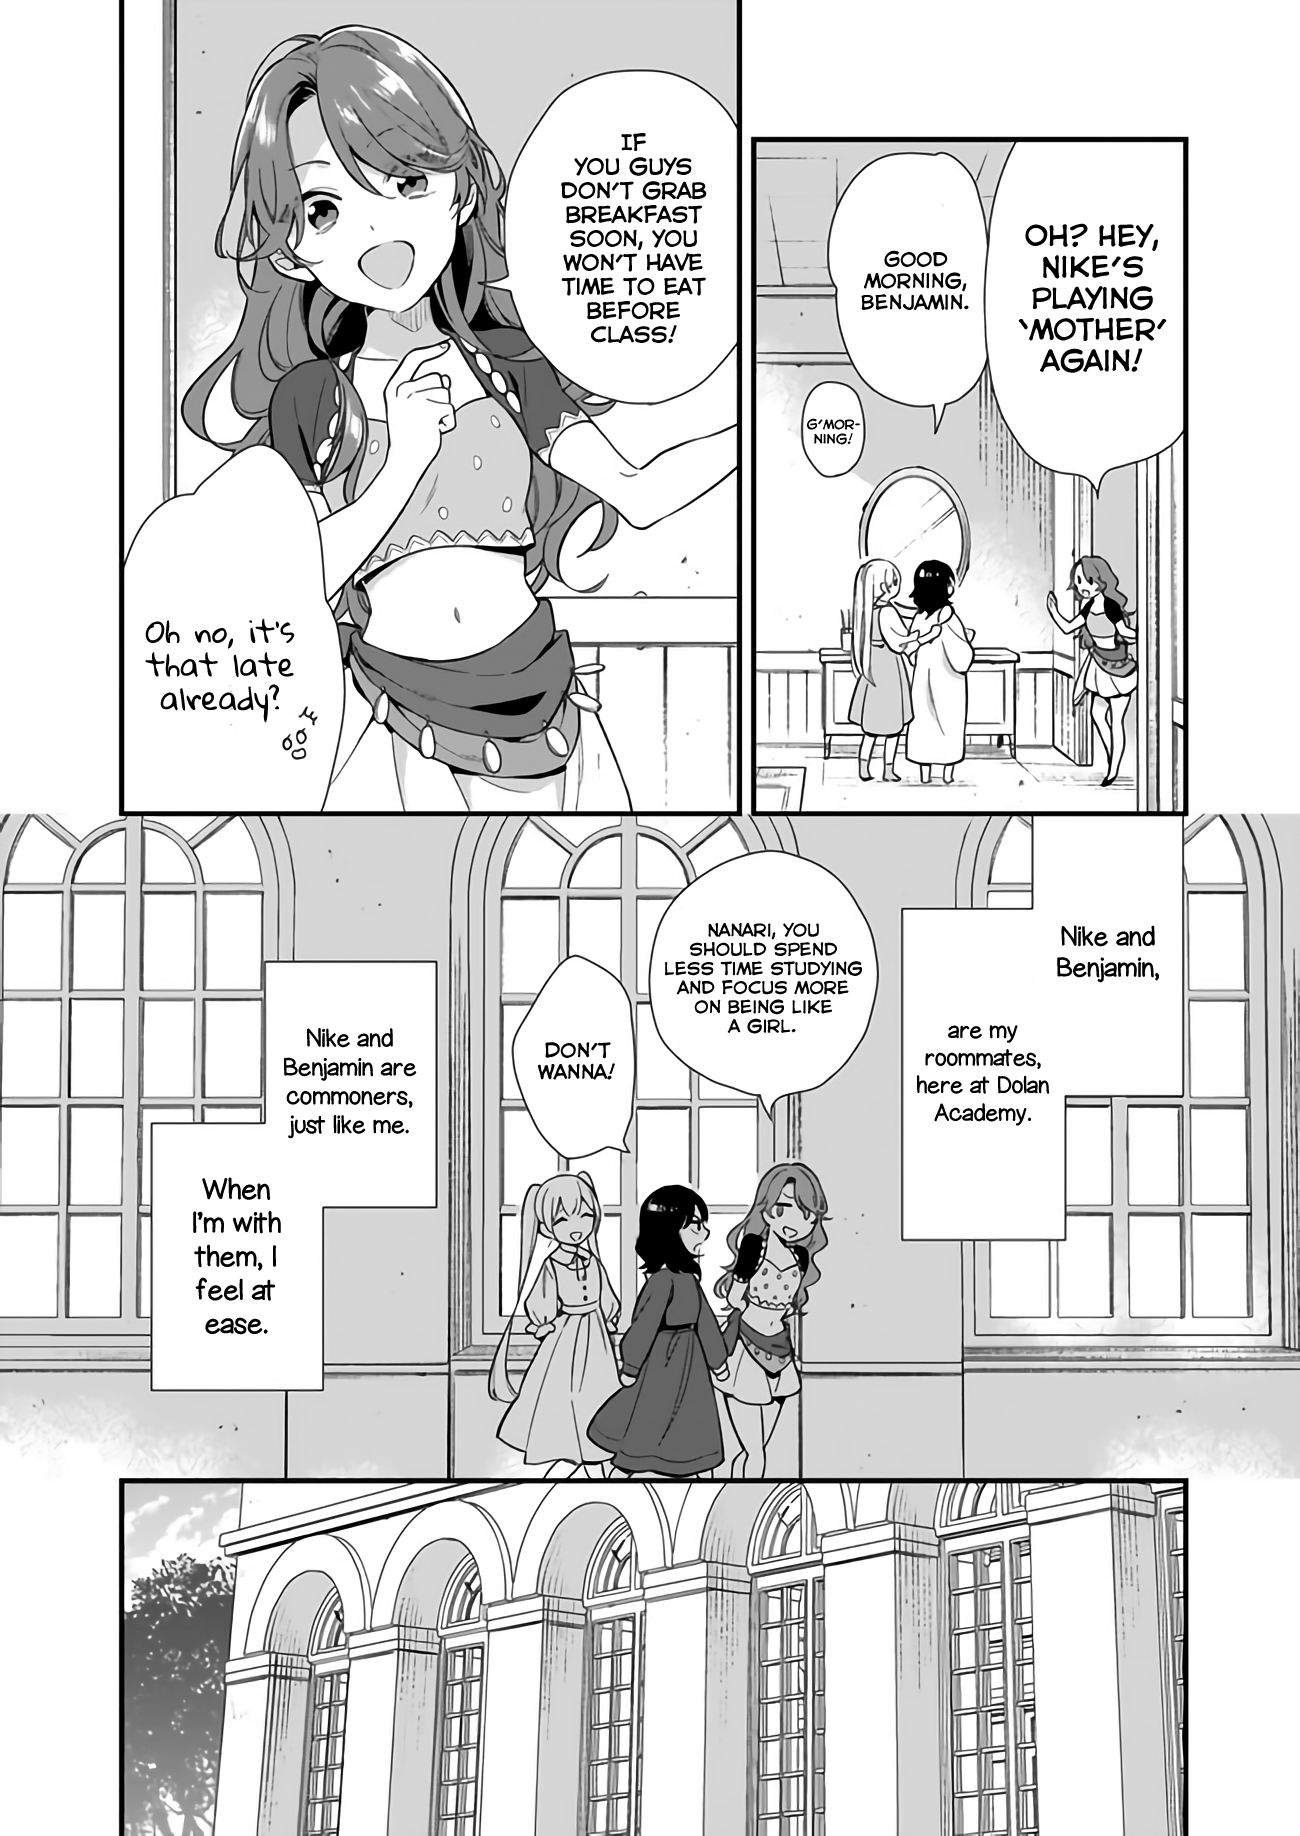 I Want to Be a Receptionist of The Magic World! Ch. 1